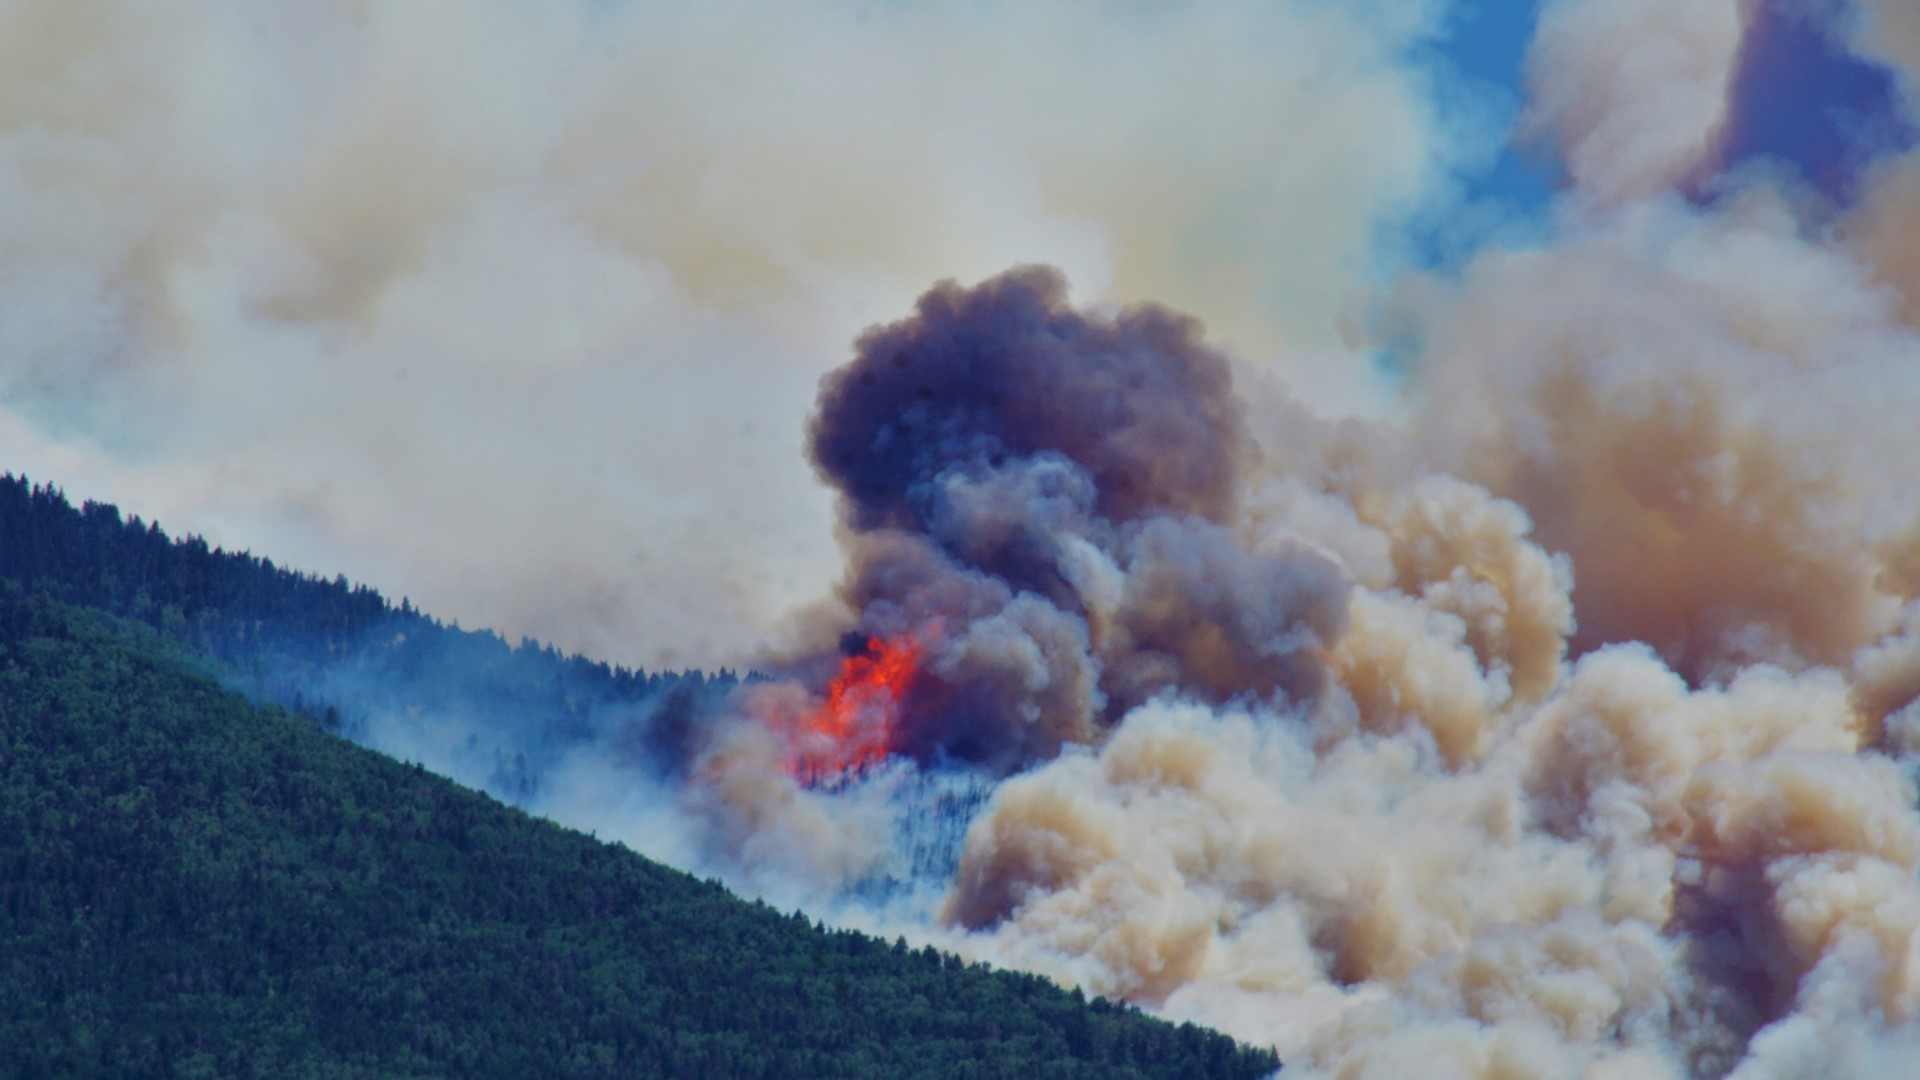 The Pipeline Fire near Flagstaff has burned more than 5,000 acres. Police arrested a man Sunday and charged him with violating the forest's fire ban.